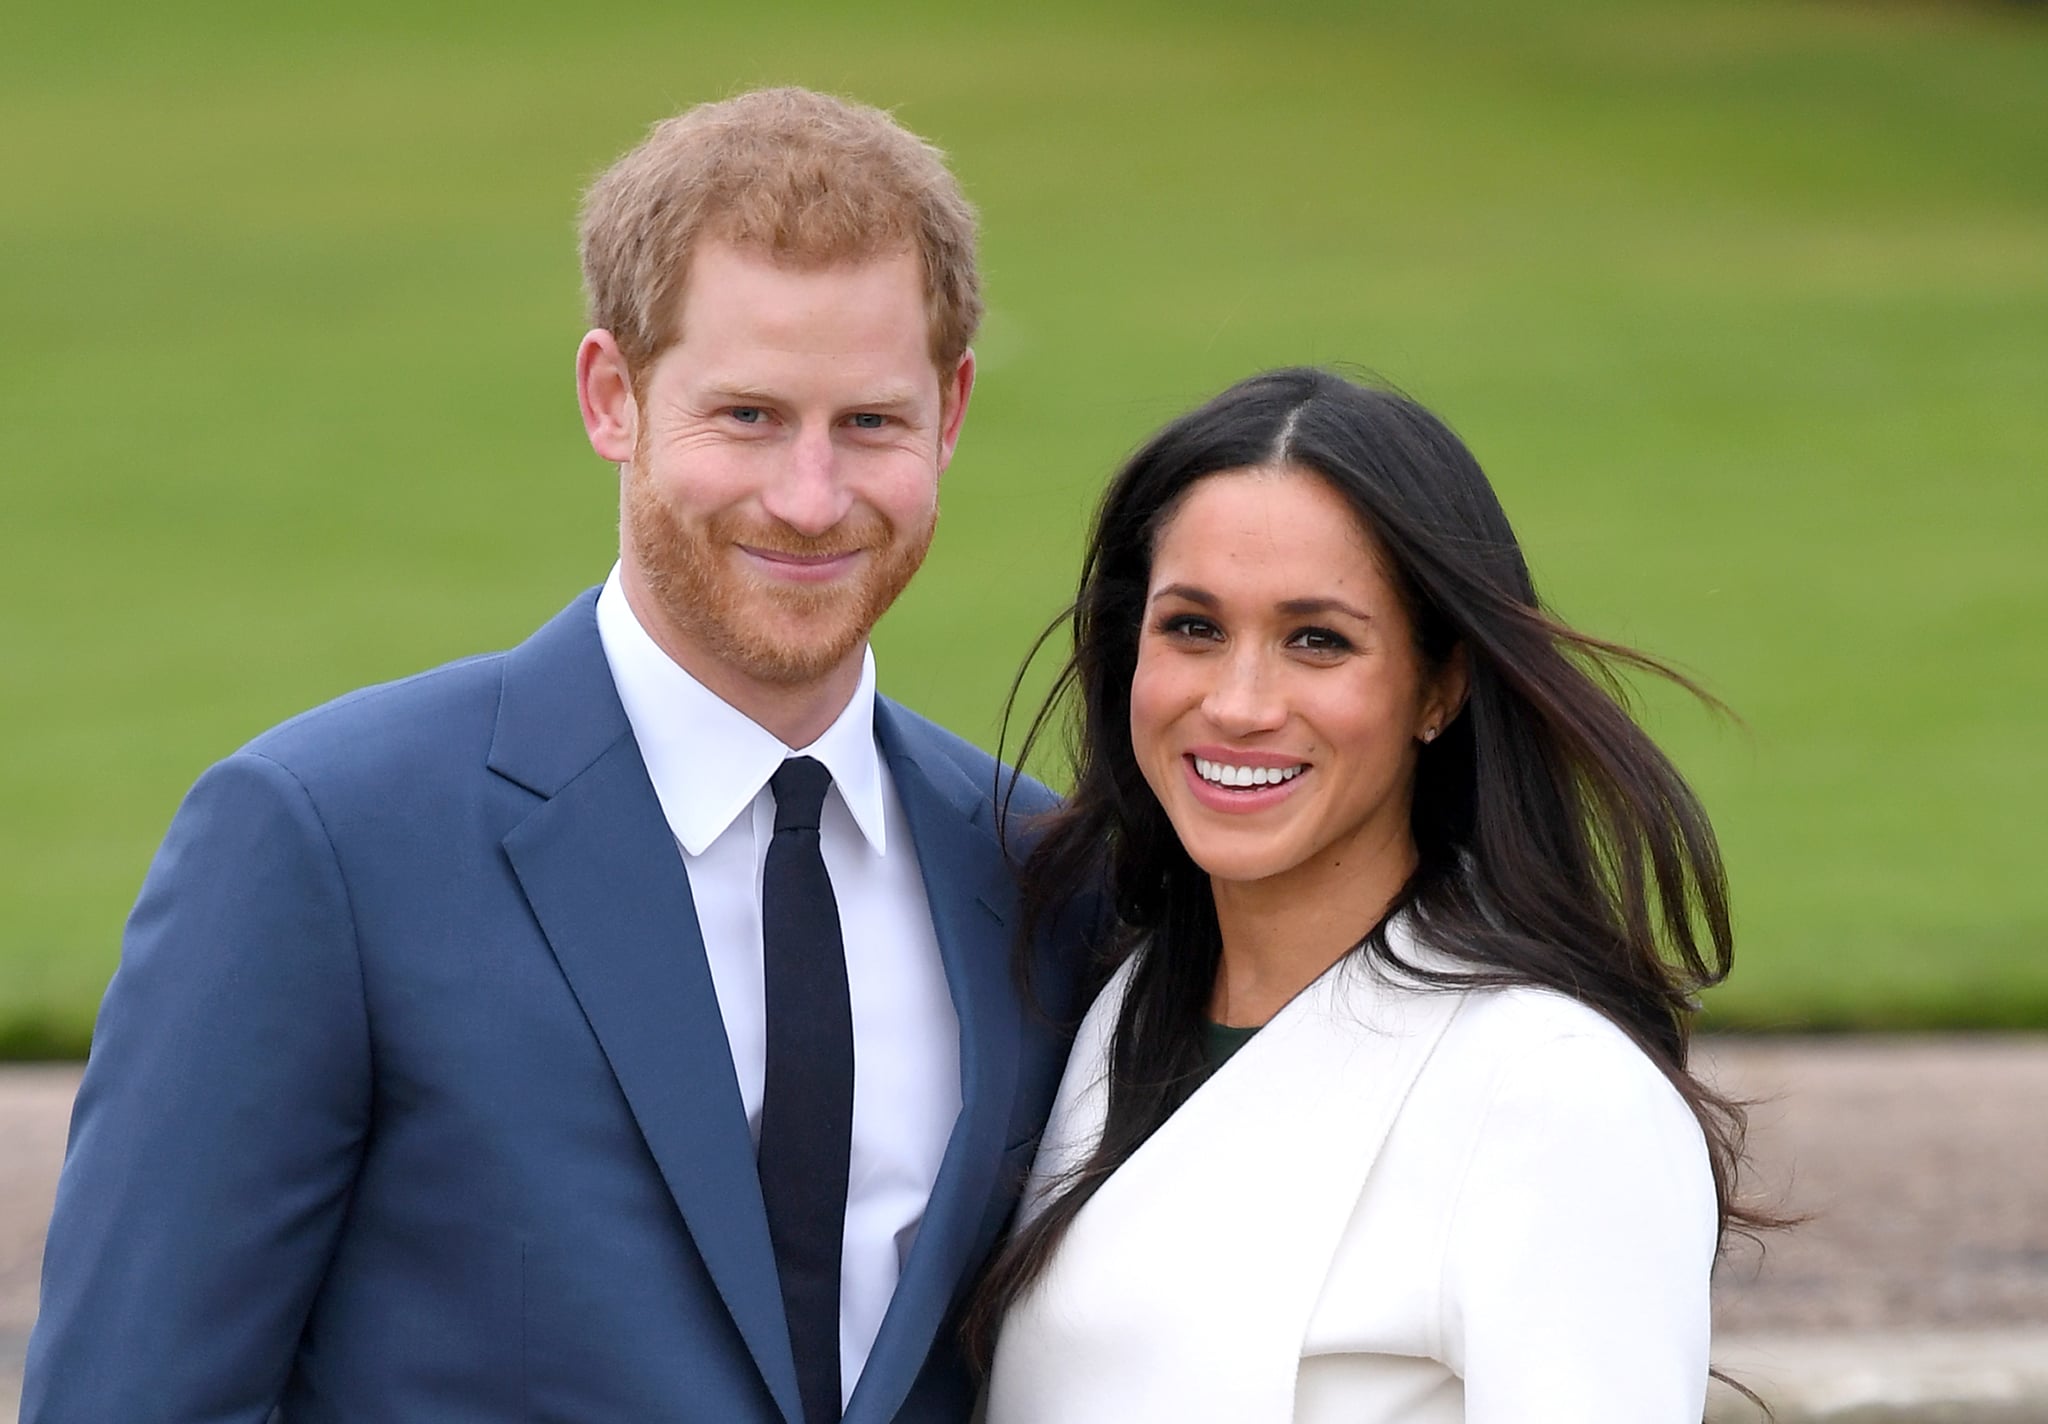 Prince Harry and Meghan Markle are embarking on a new project with Netflix after leaving their positions as senior members of the British royal family in March.